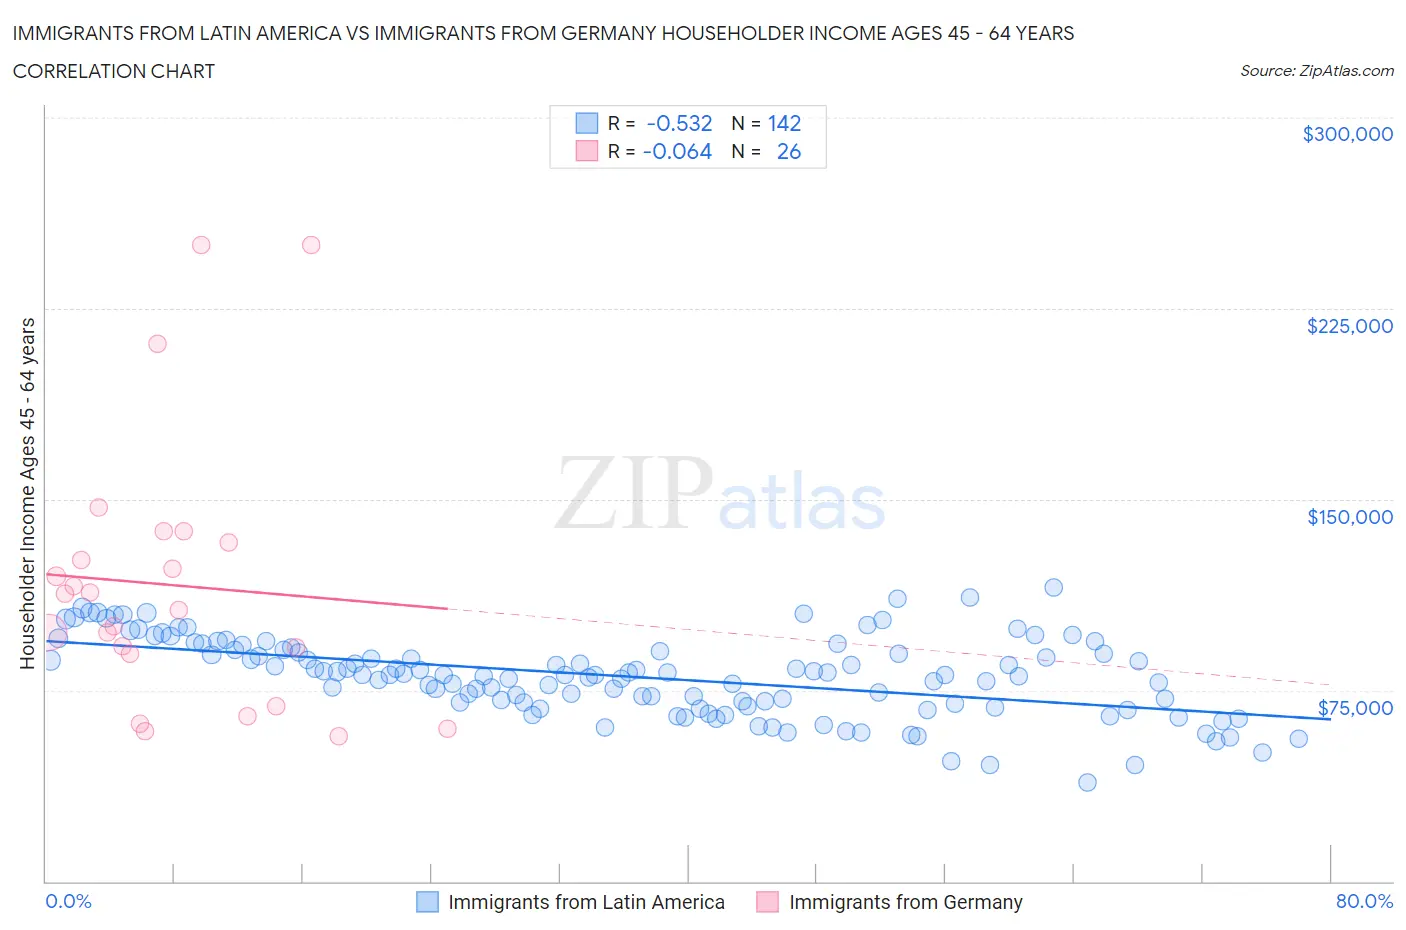 Immigrants from Latin America vs Immigrants from Germany Householder Income Ages 45 - 64 years